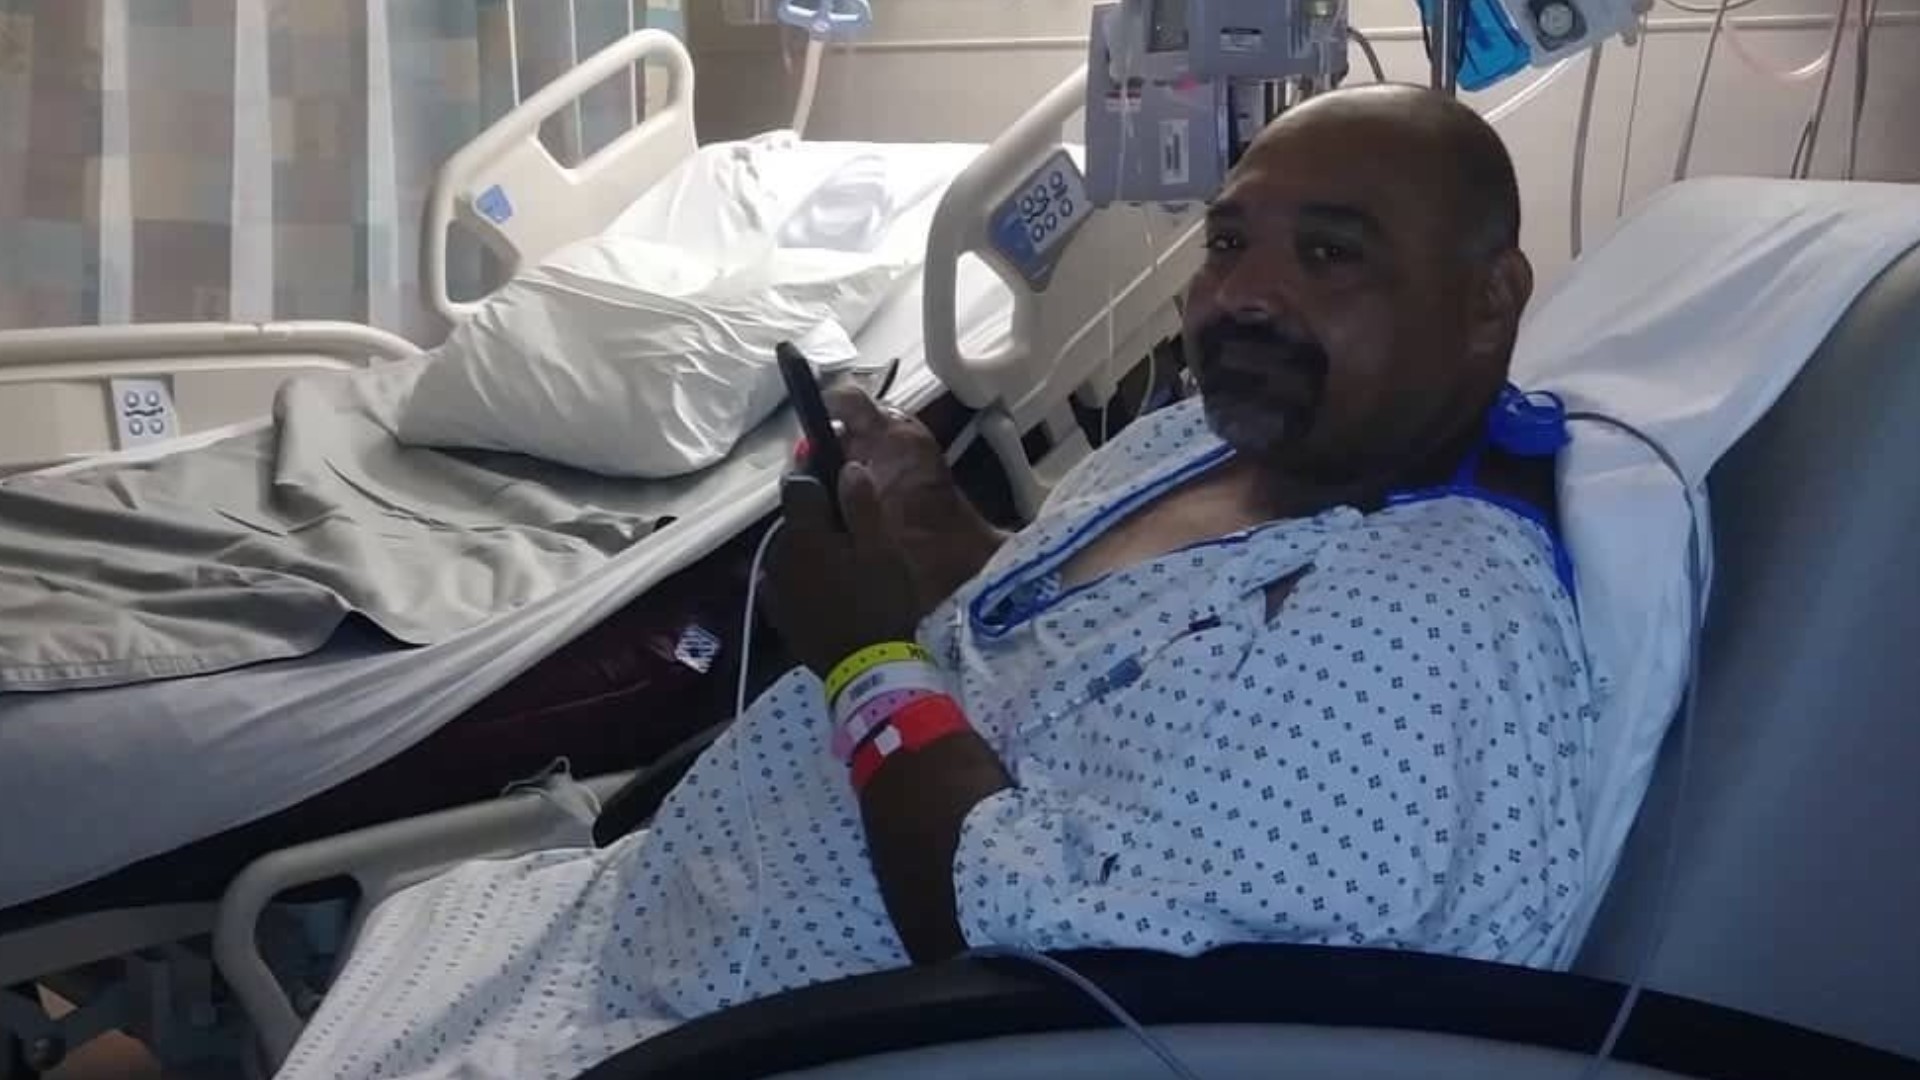 Lupe Cerecerez was suffering from end-stage renal disease, but now he is getting the chance to get his life back to normal.